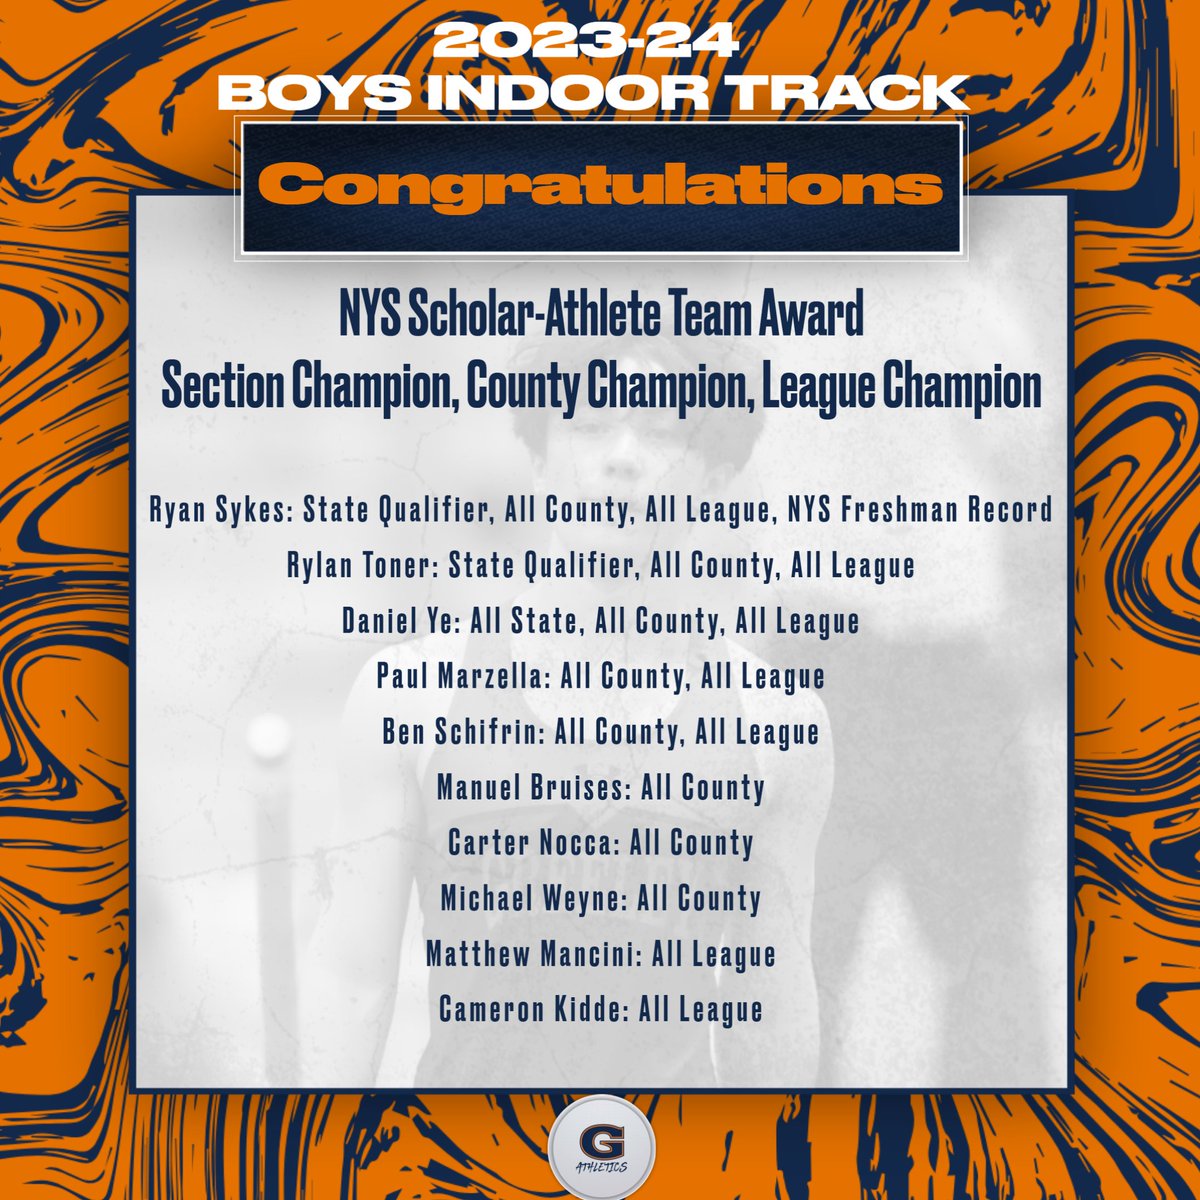 Join us in celebrating post-season honors for our 2023-24 boys indoor track team! 
#GoGreeley #WeAreChappaqua